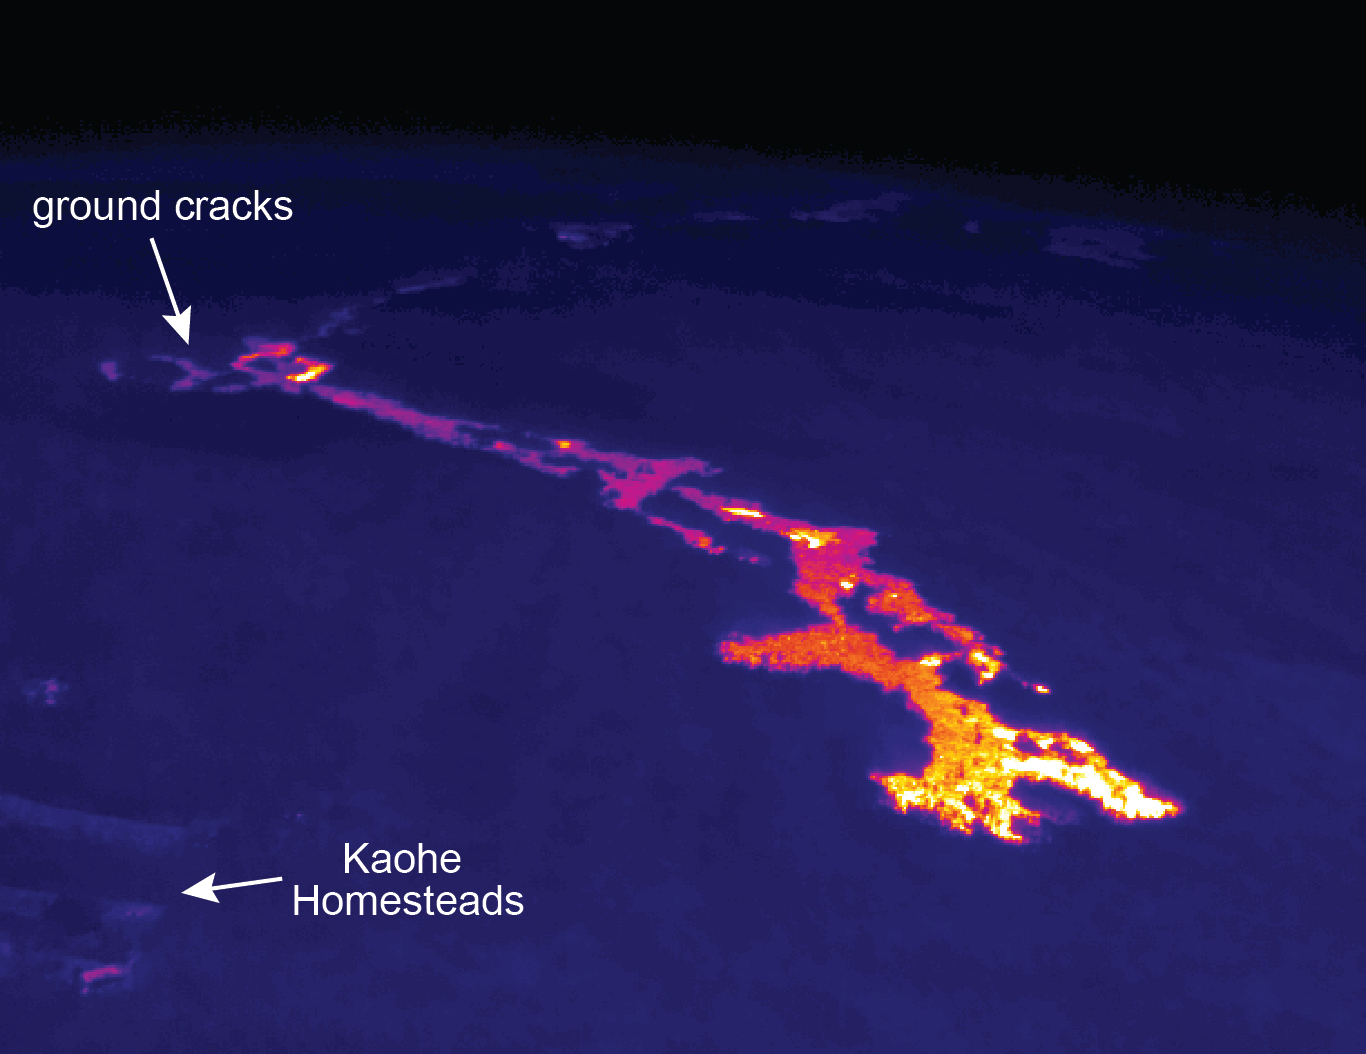 A thermal image of the June 27 lava flow front by USGS Hawaiian Volcano Observatory. h flow is on Puʻu ʻŌʻō, which can be seen at the top of the normal photograph. The flow emerged from ground cracks around September 3 and began spilling out towards the north, granting Kaohe Homesteads a reprieve. 